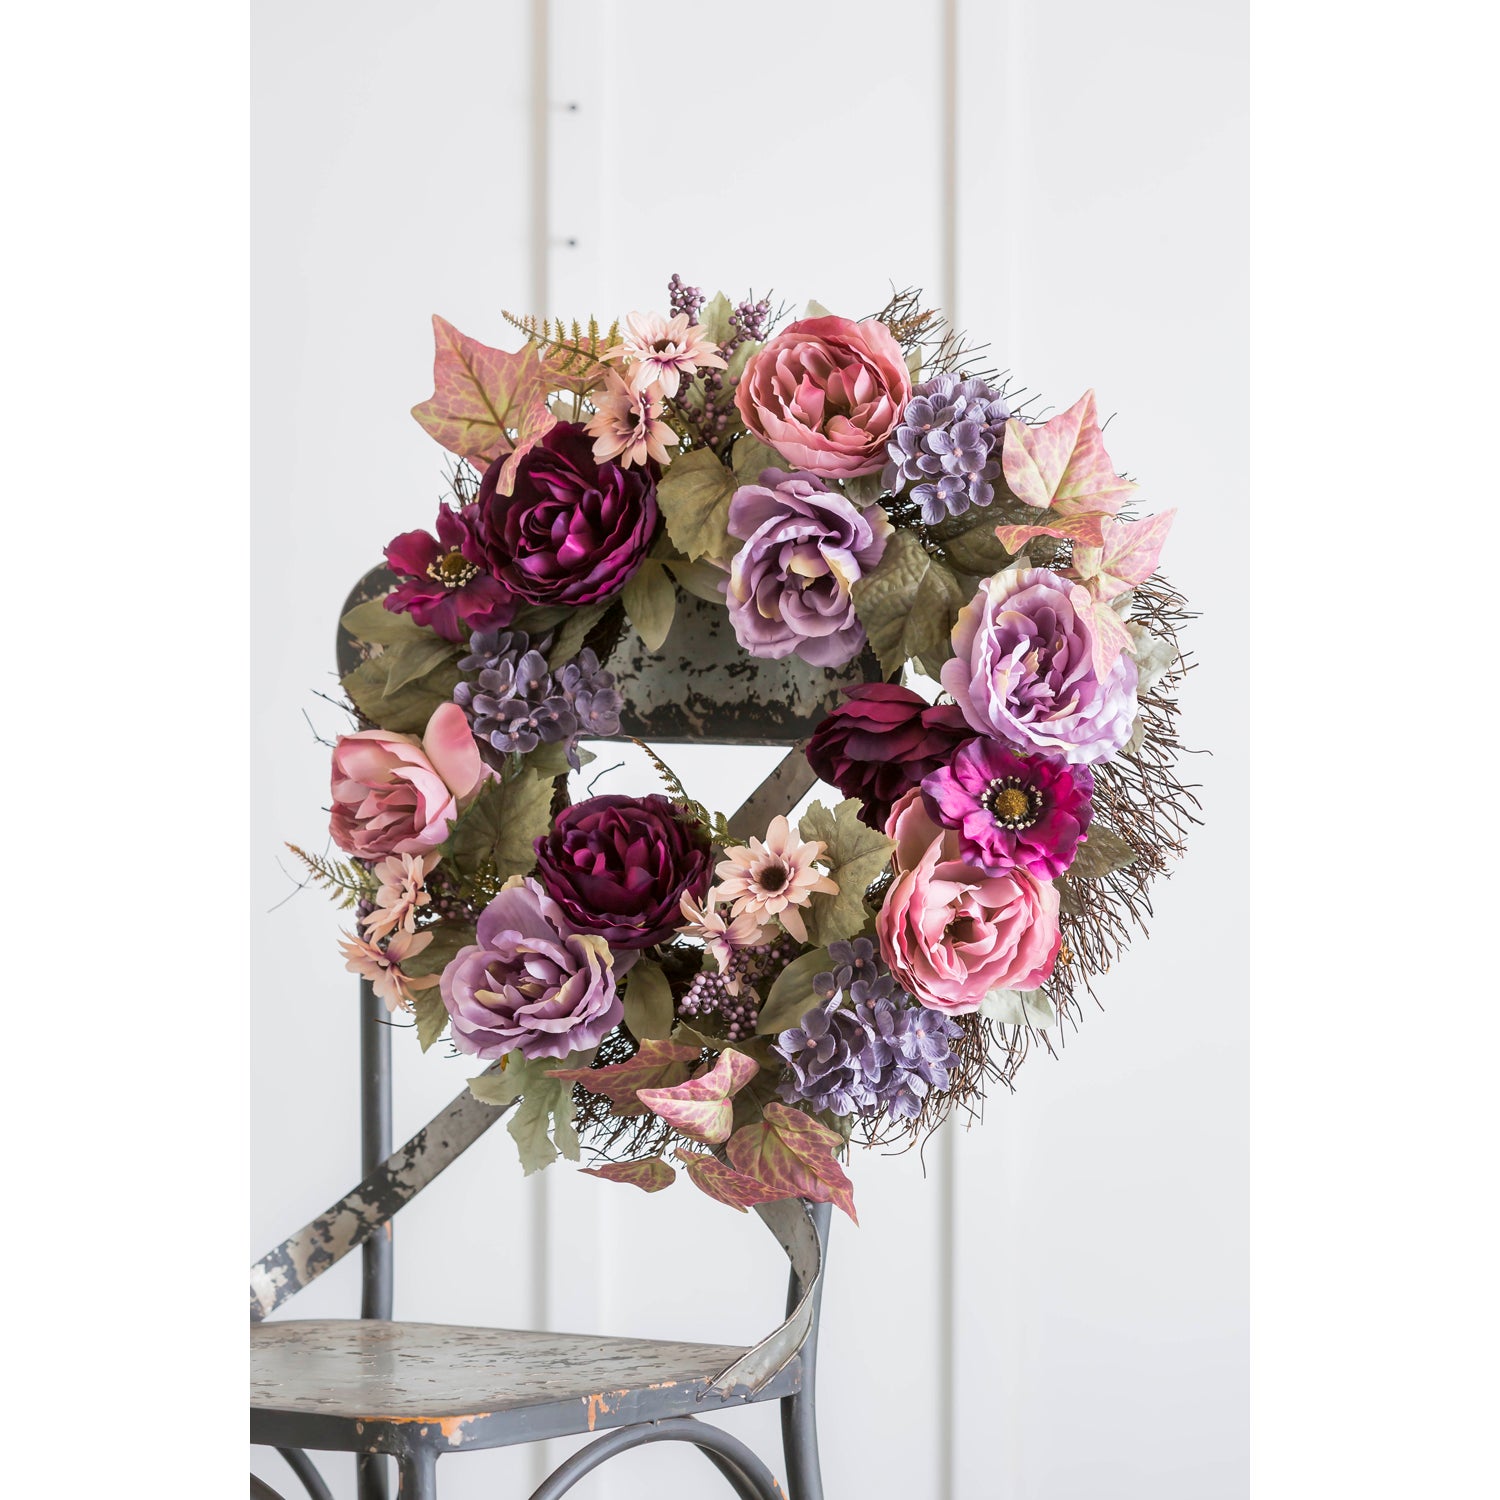 Vine Wreath with Roses, Hydrangeas, and Berries